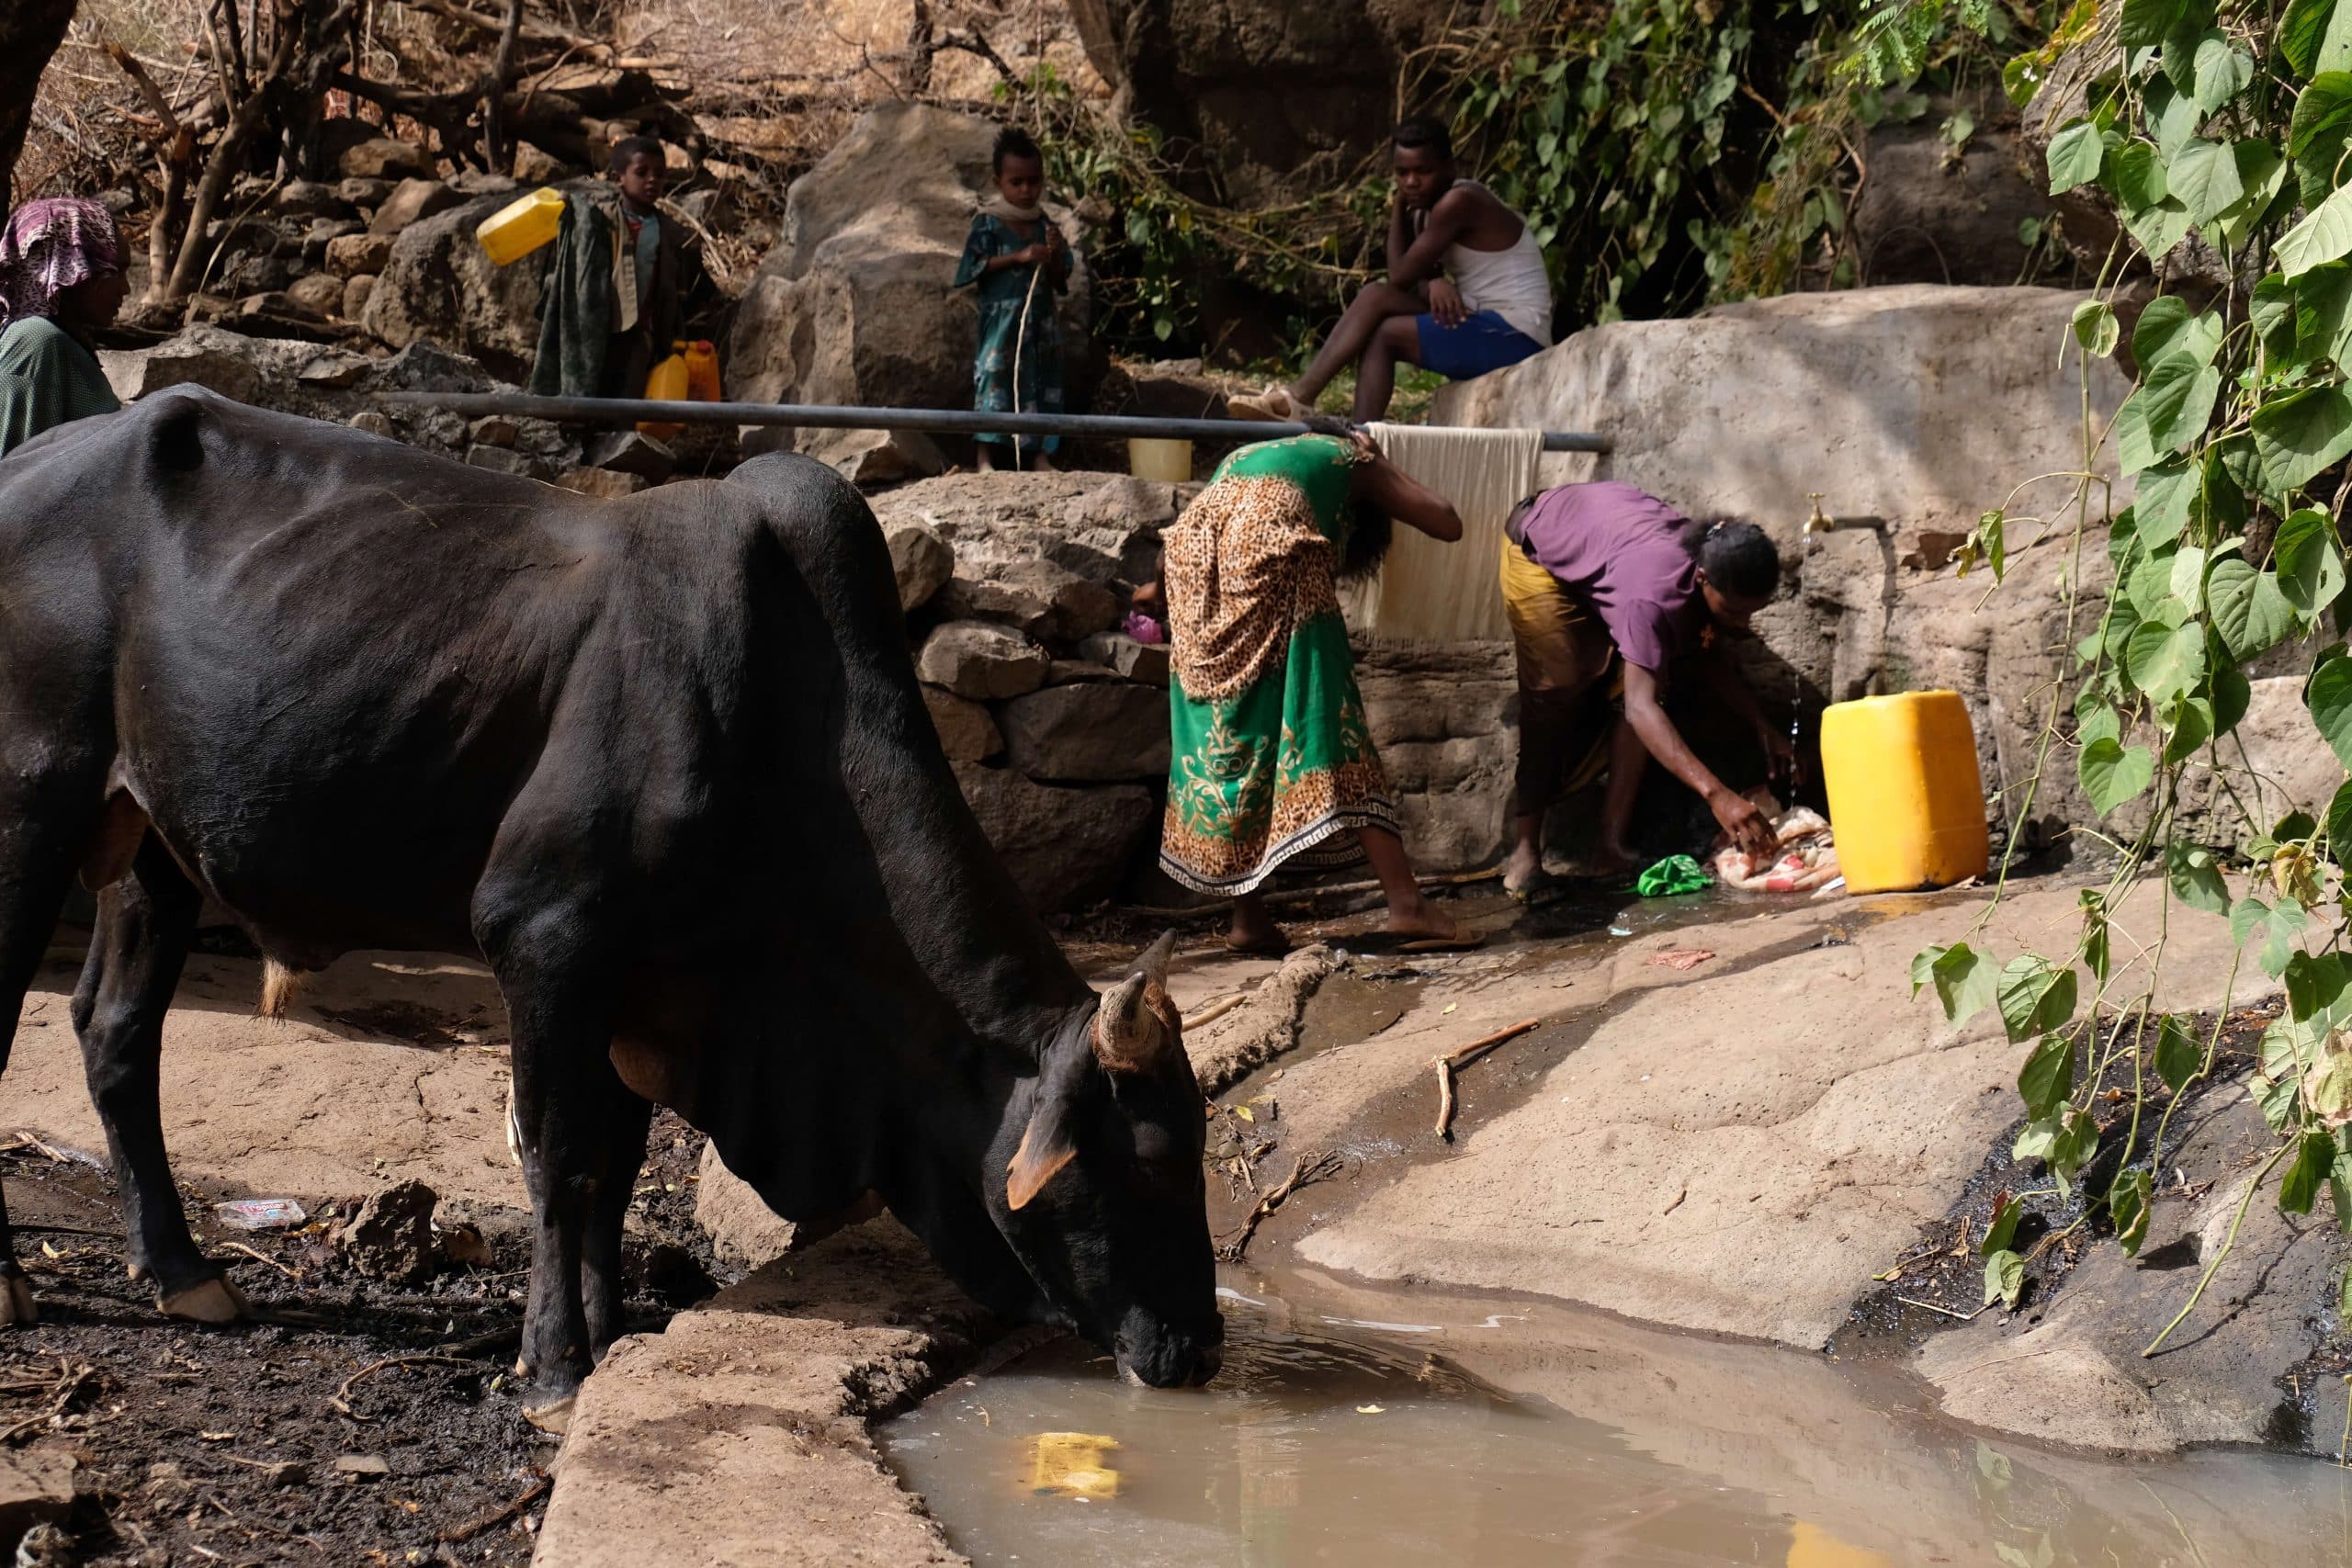 Animals drink from a water source while women do laundry and wash their hair